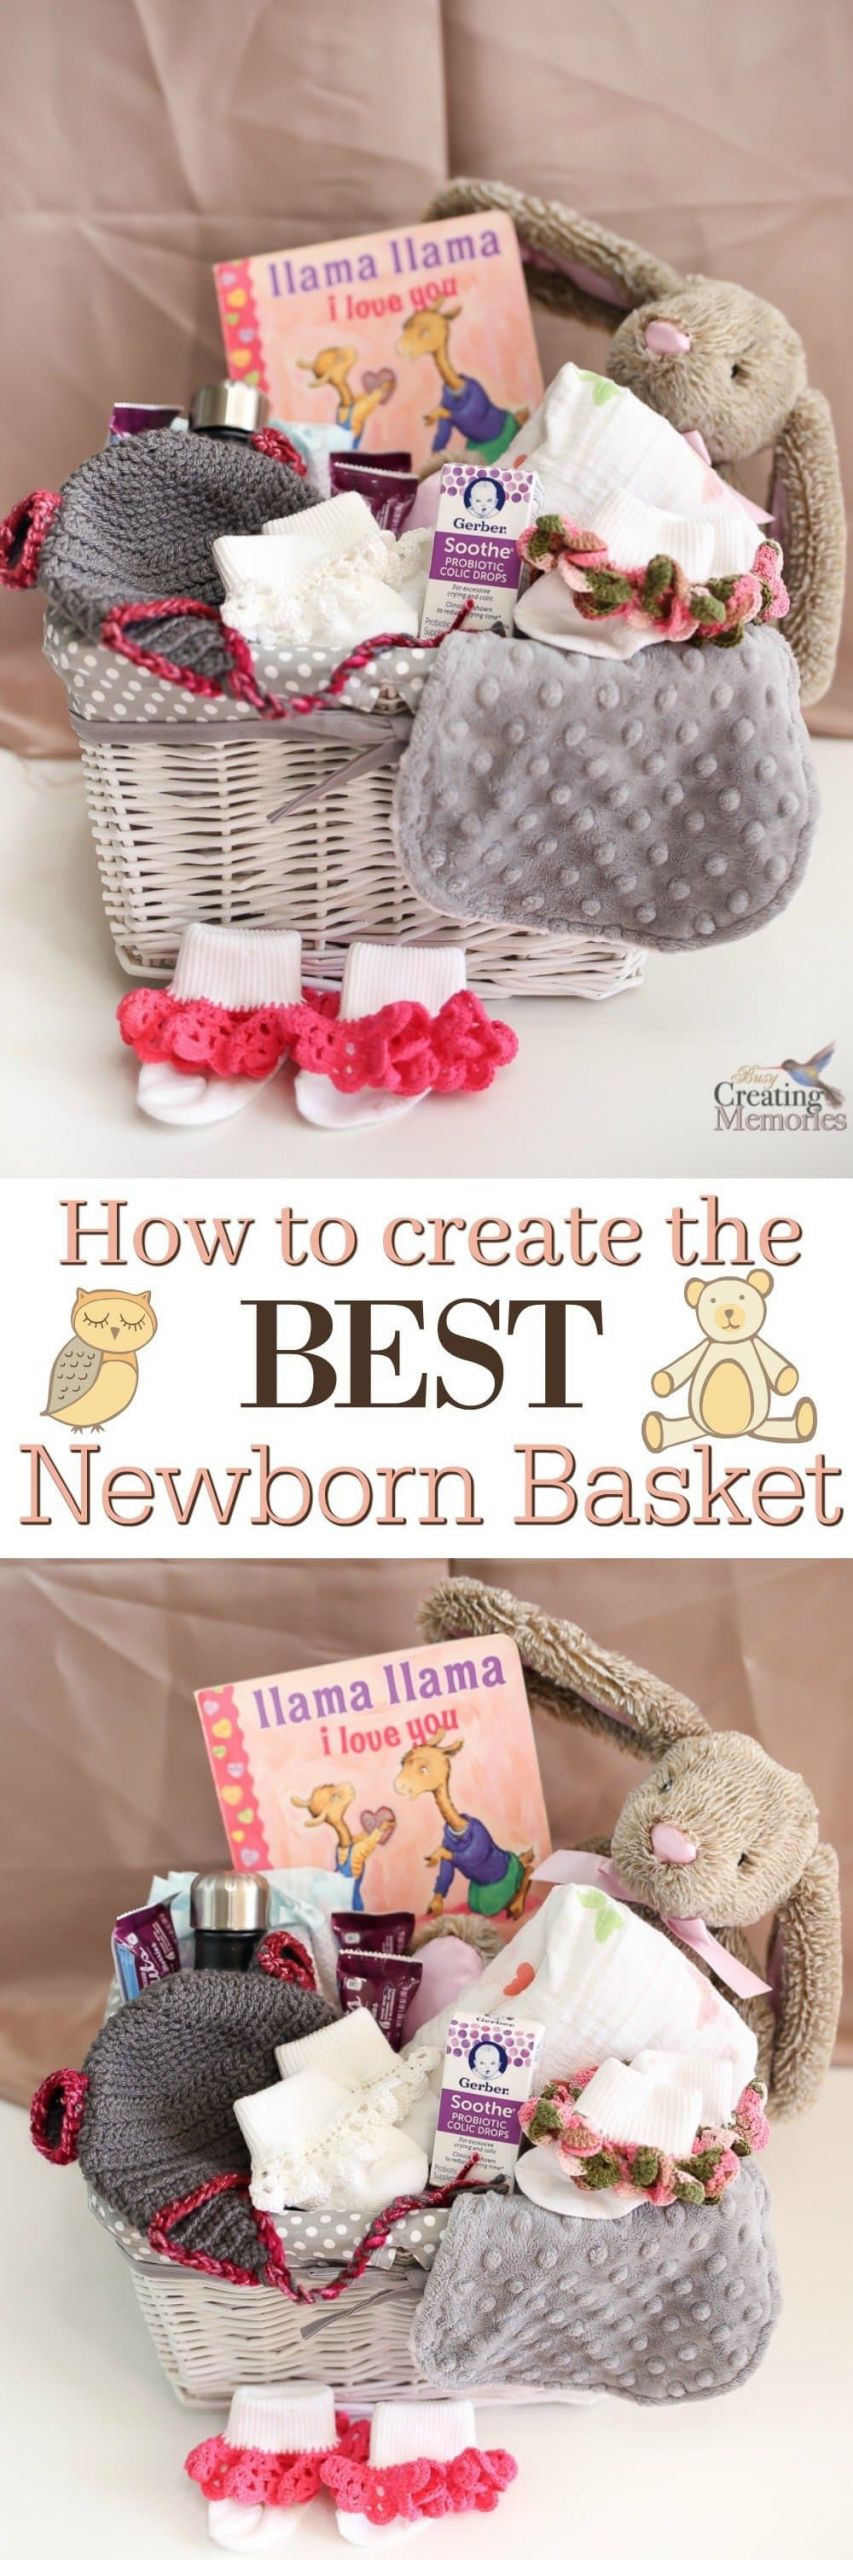 Baby Gifts Ideas Pinterest
 How to create the BEST Newborn Gift Basket that Mom will love